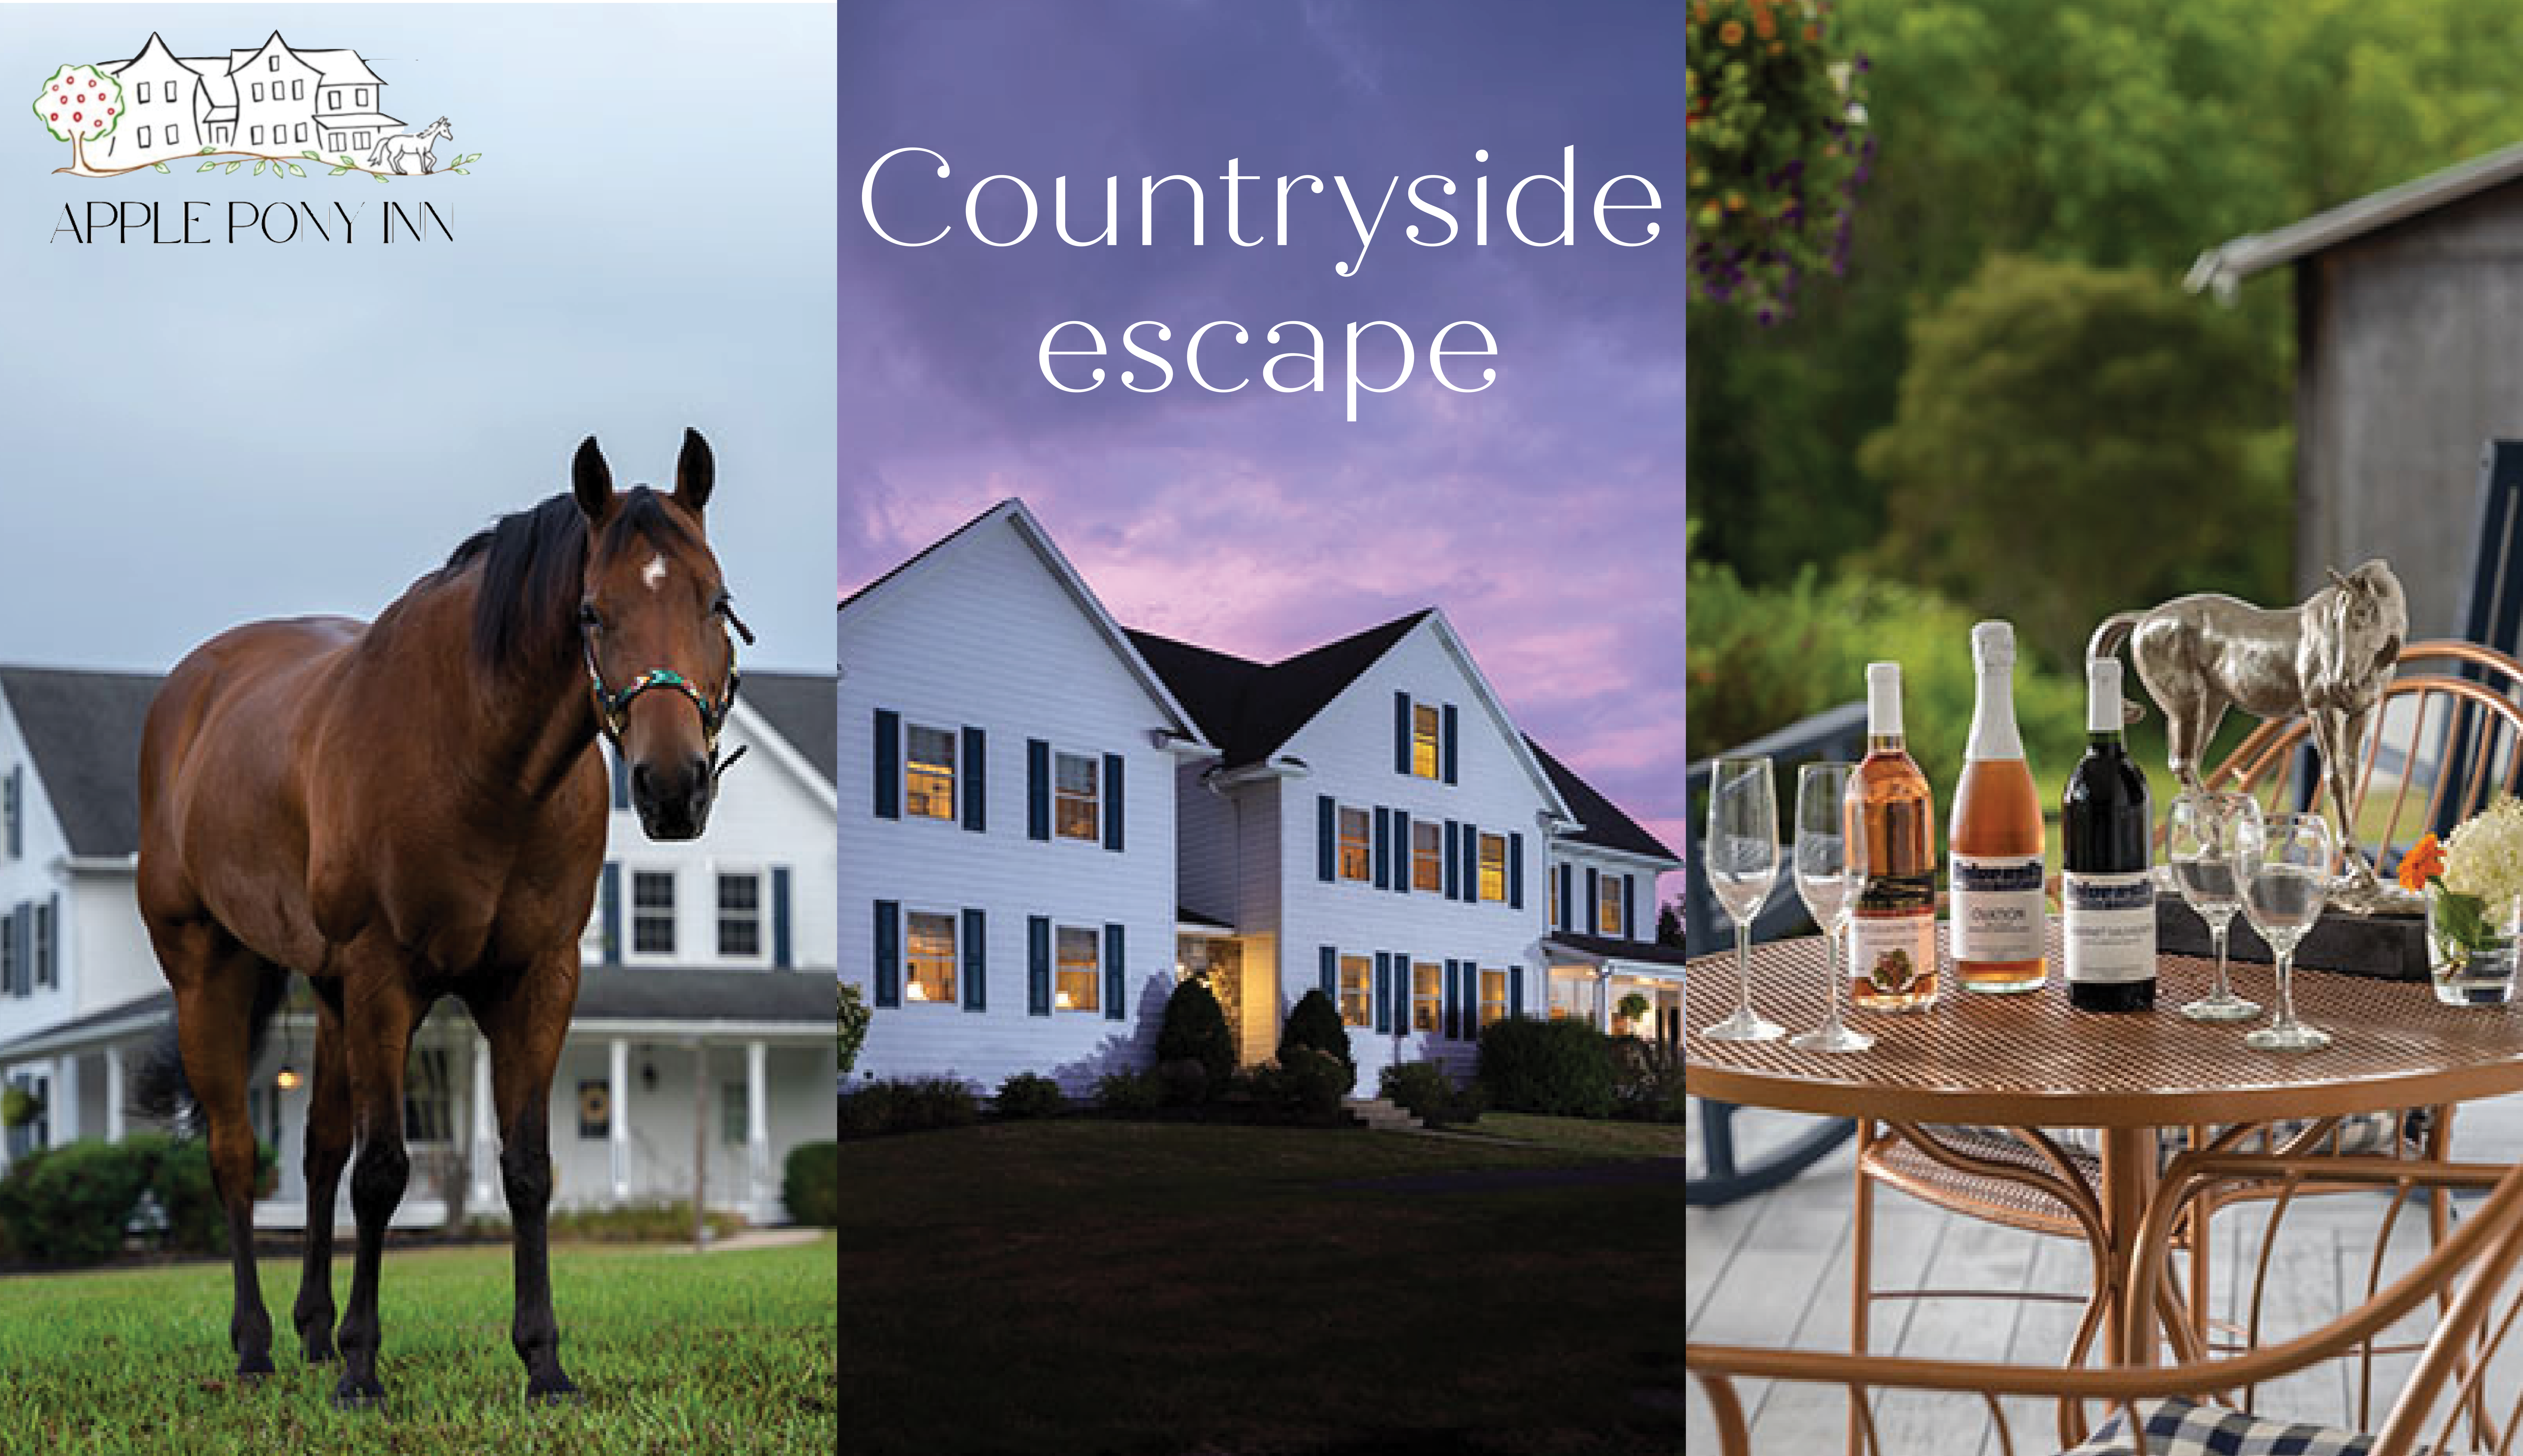 Equine-inspired style and breathtaking views await guests at the Apple Pony Inn